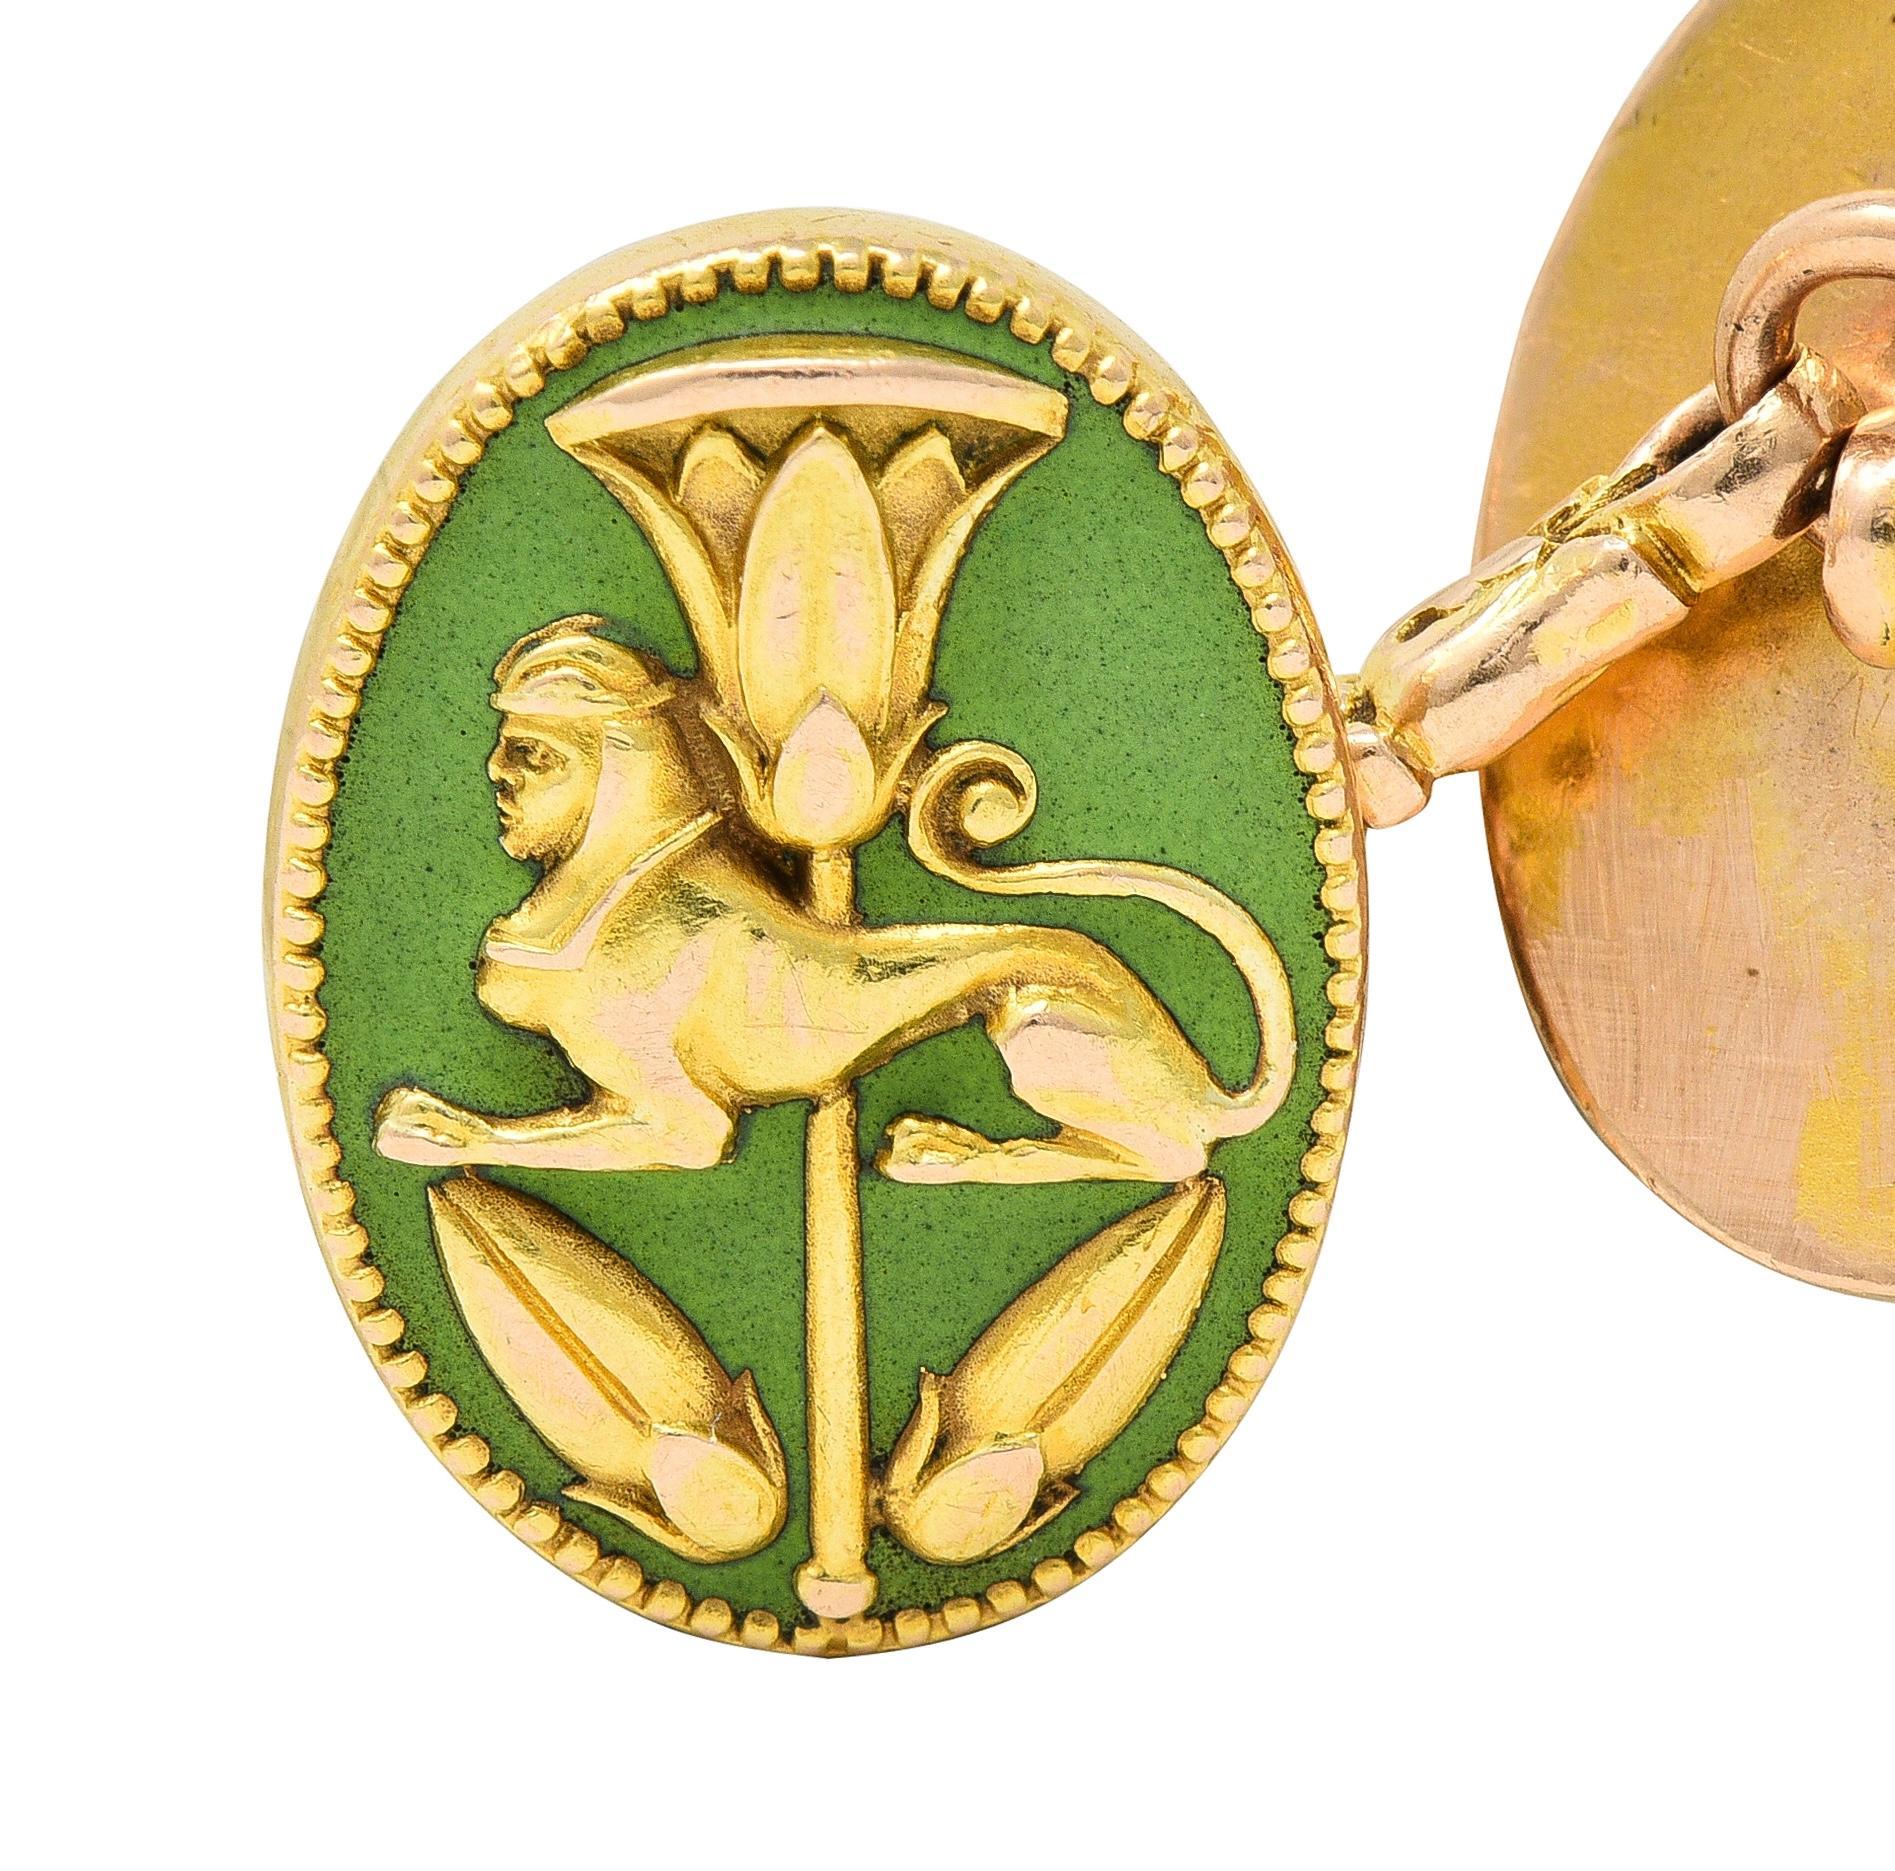 Designed as link-style cufflinks terminating with oval-shaped faces
With stylized gold lotus flower, pharaoh, Eye of Horus, and a sphinx
Each raised with grooved detailing - atop enamel surrounds
Opaque and glossy light yellowish green - minimal